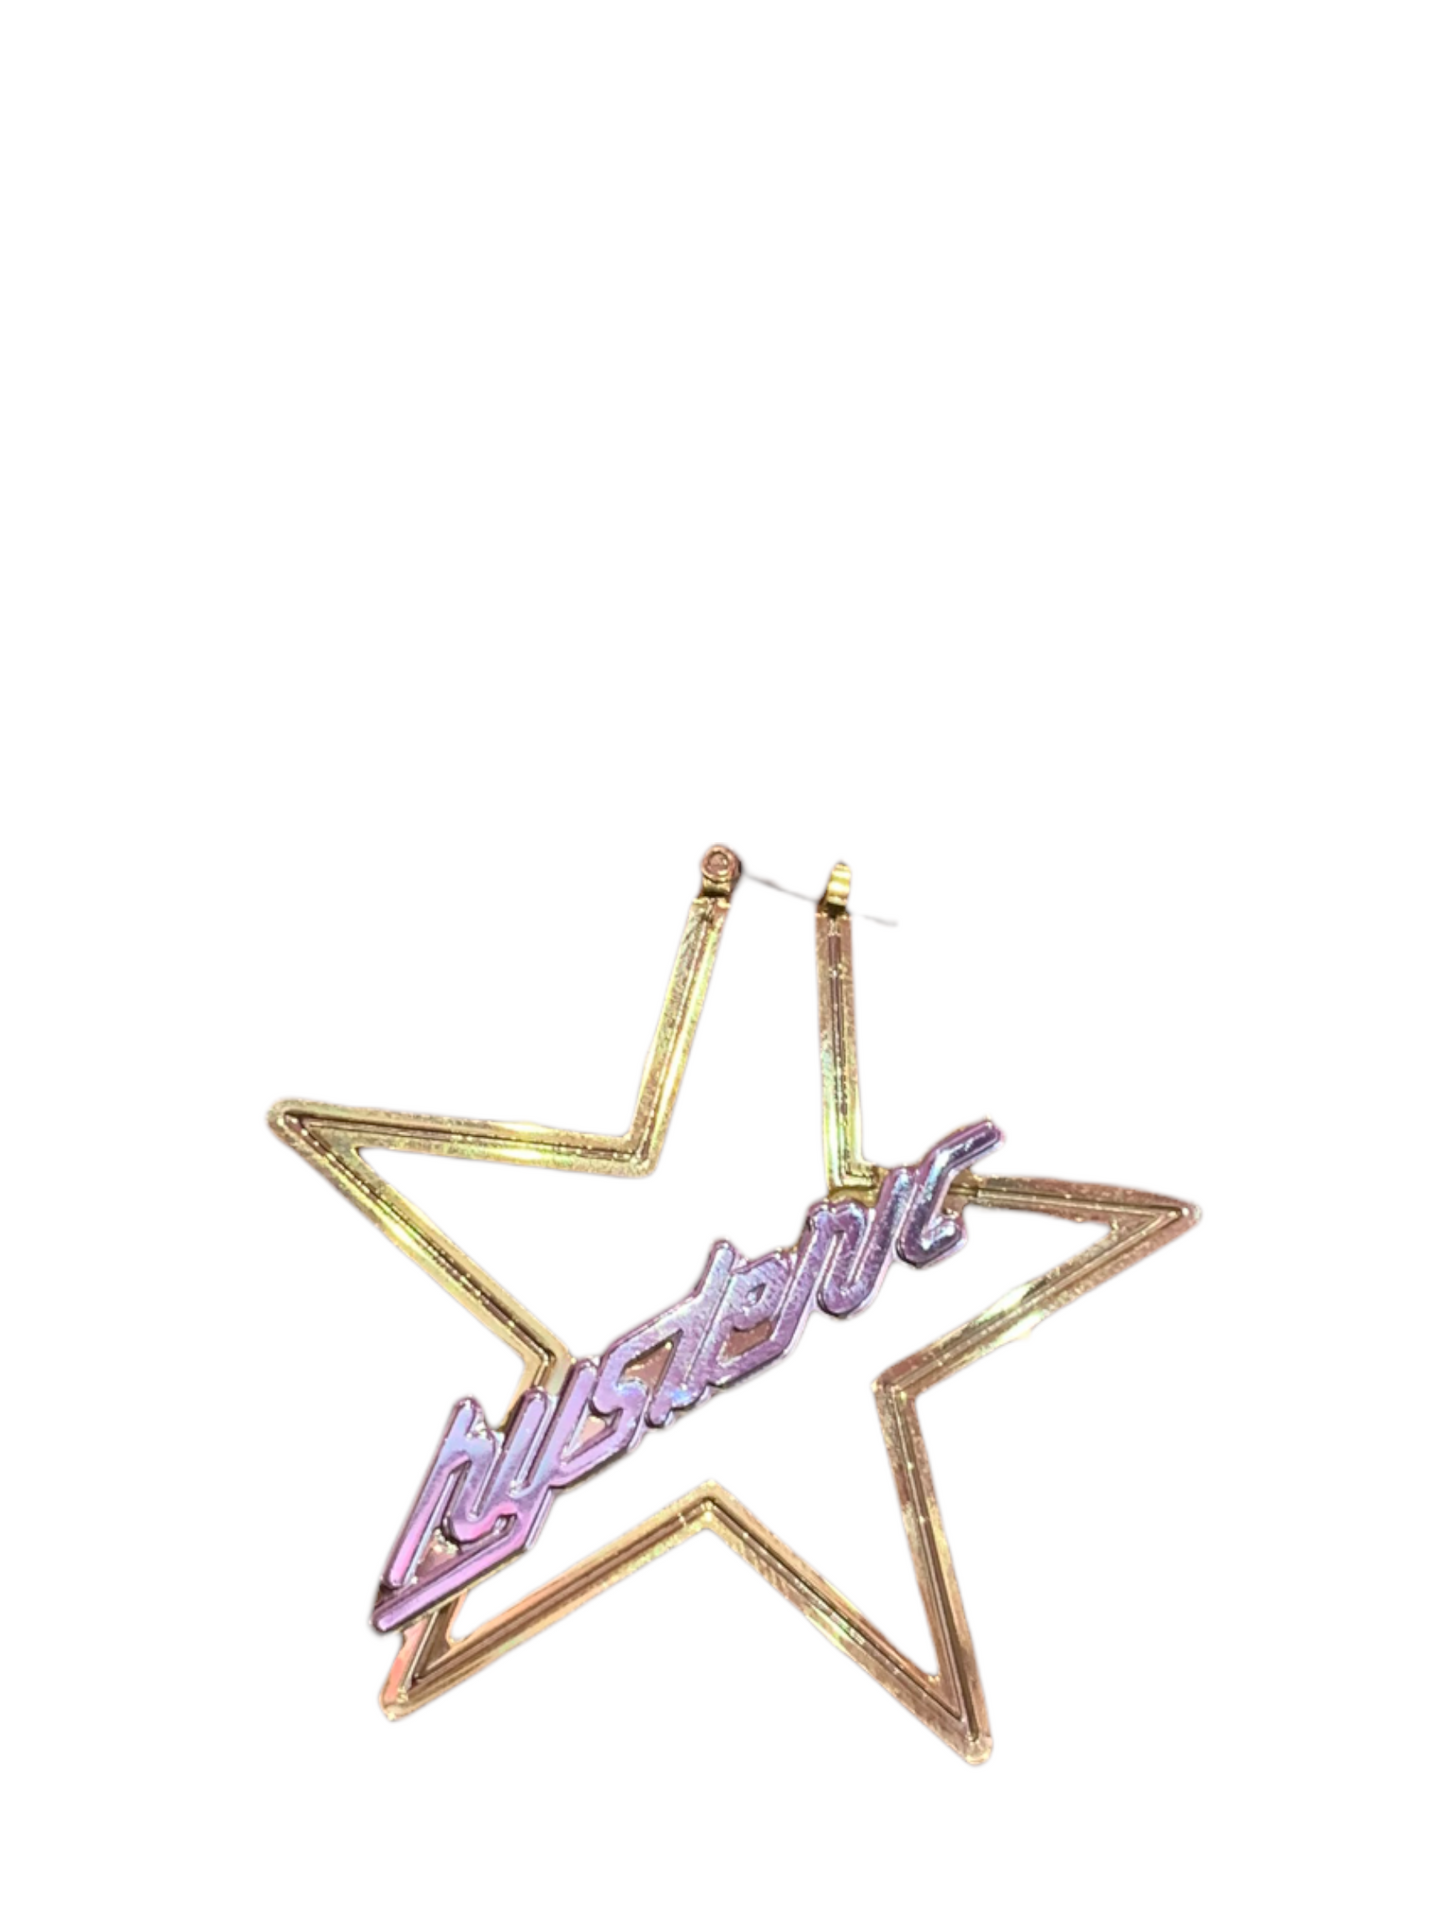 Vintage Hysteric Glamour Star shape earrings